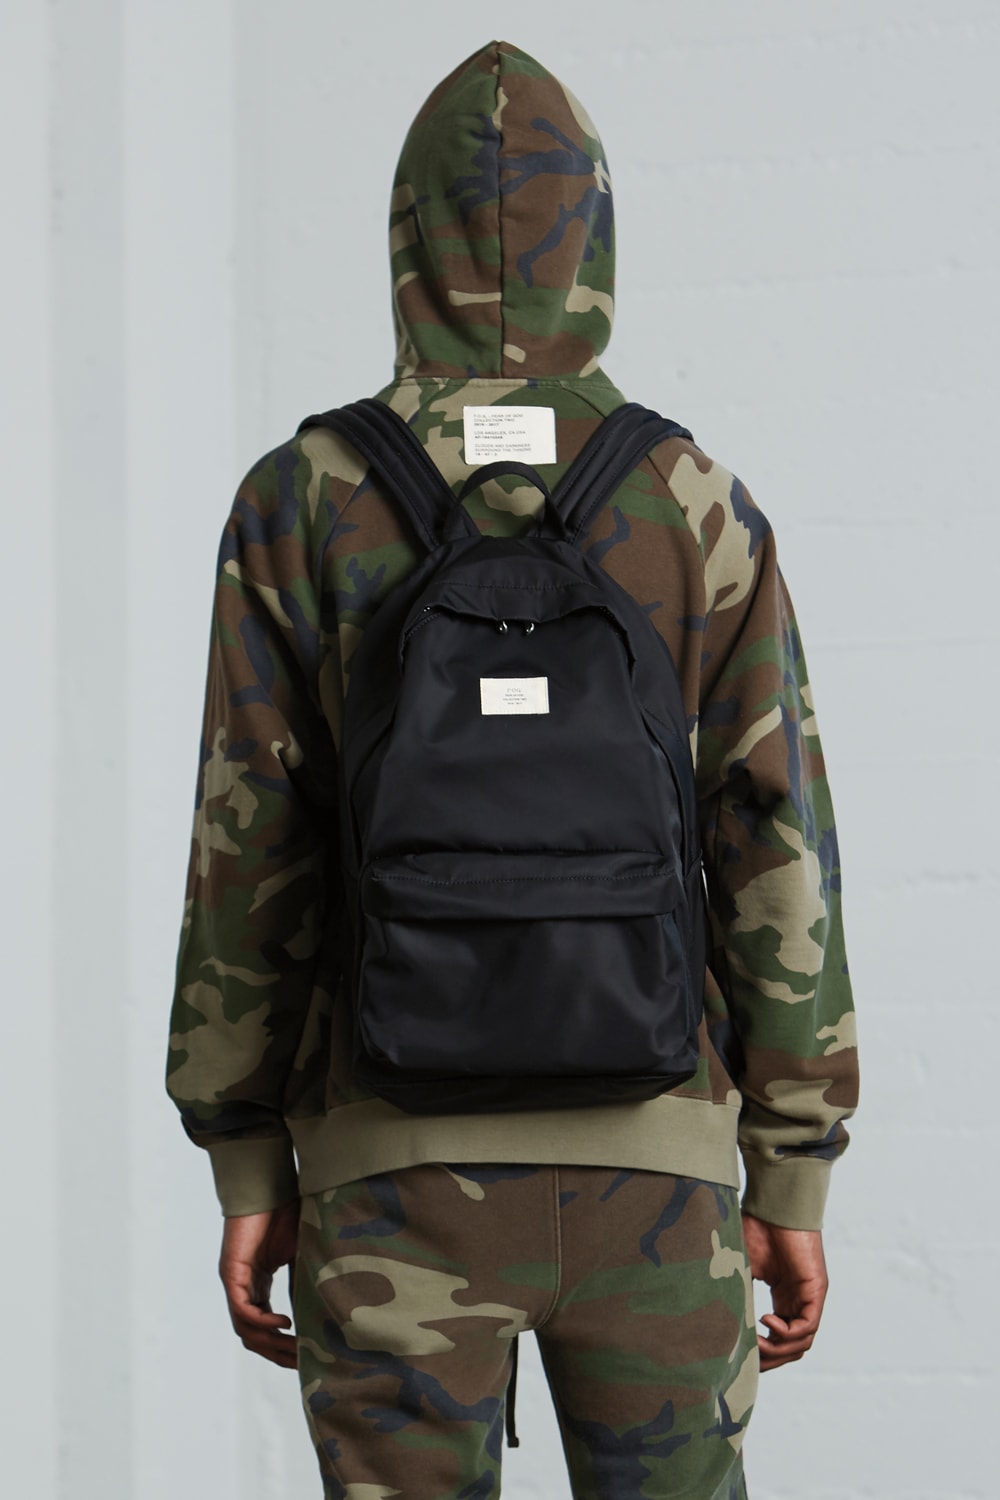 Jerry Lorenzo FOG PacSun Collection Two